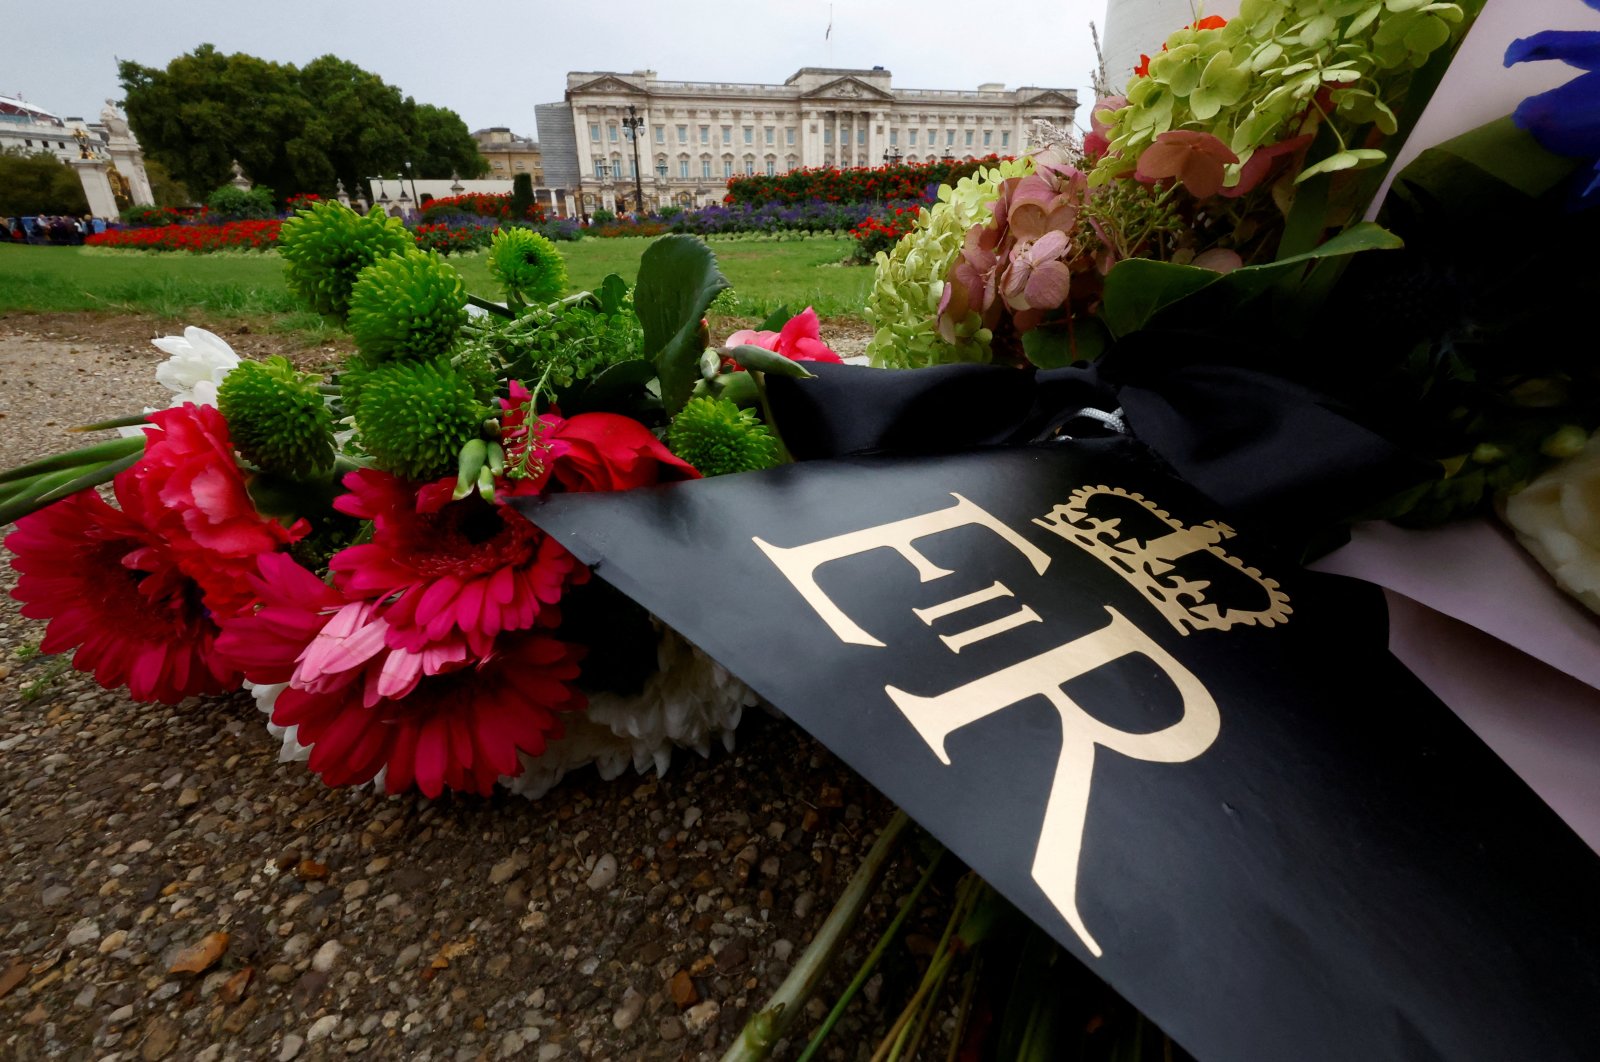 Floral tributes with the royal cypher of Britain&#039;s Queen Elizabeth are seen outside Buckingham Palace in London, Britain, Sept. 13, 2022. (Reuters Photo)